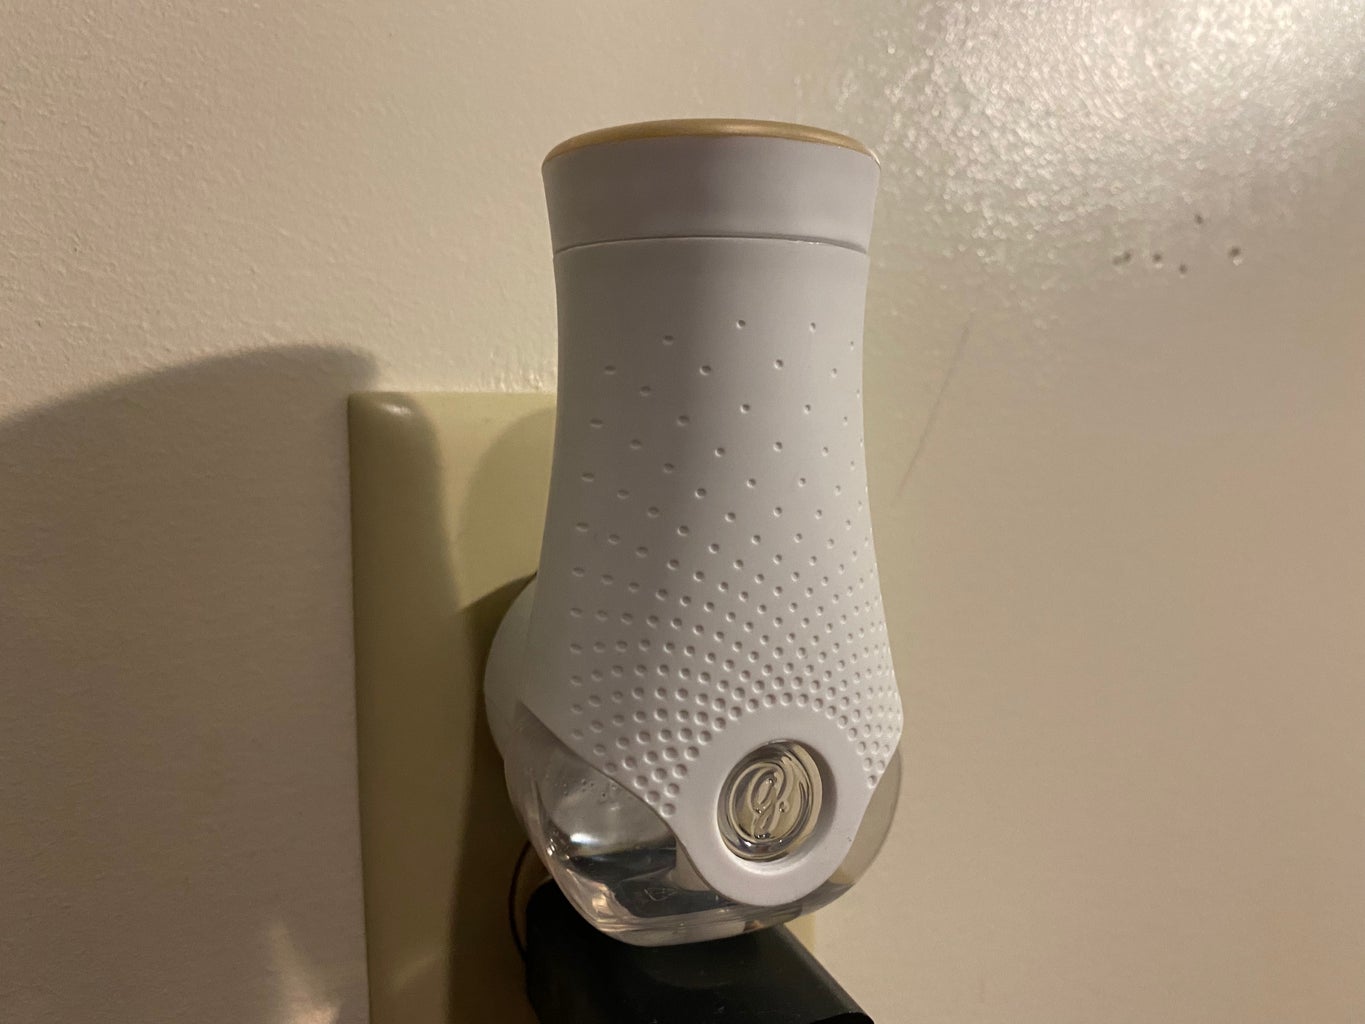 Glade air freshener plugged into the wall